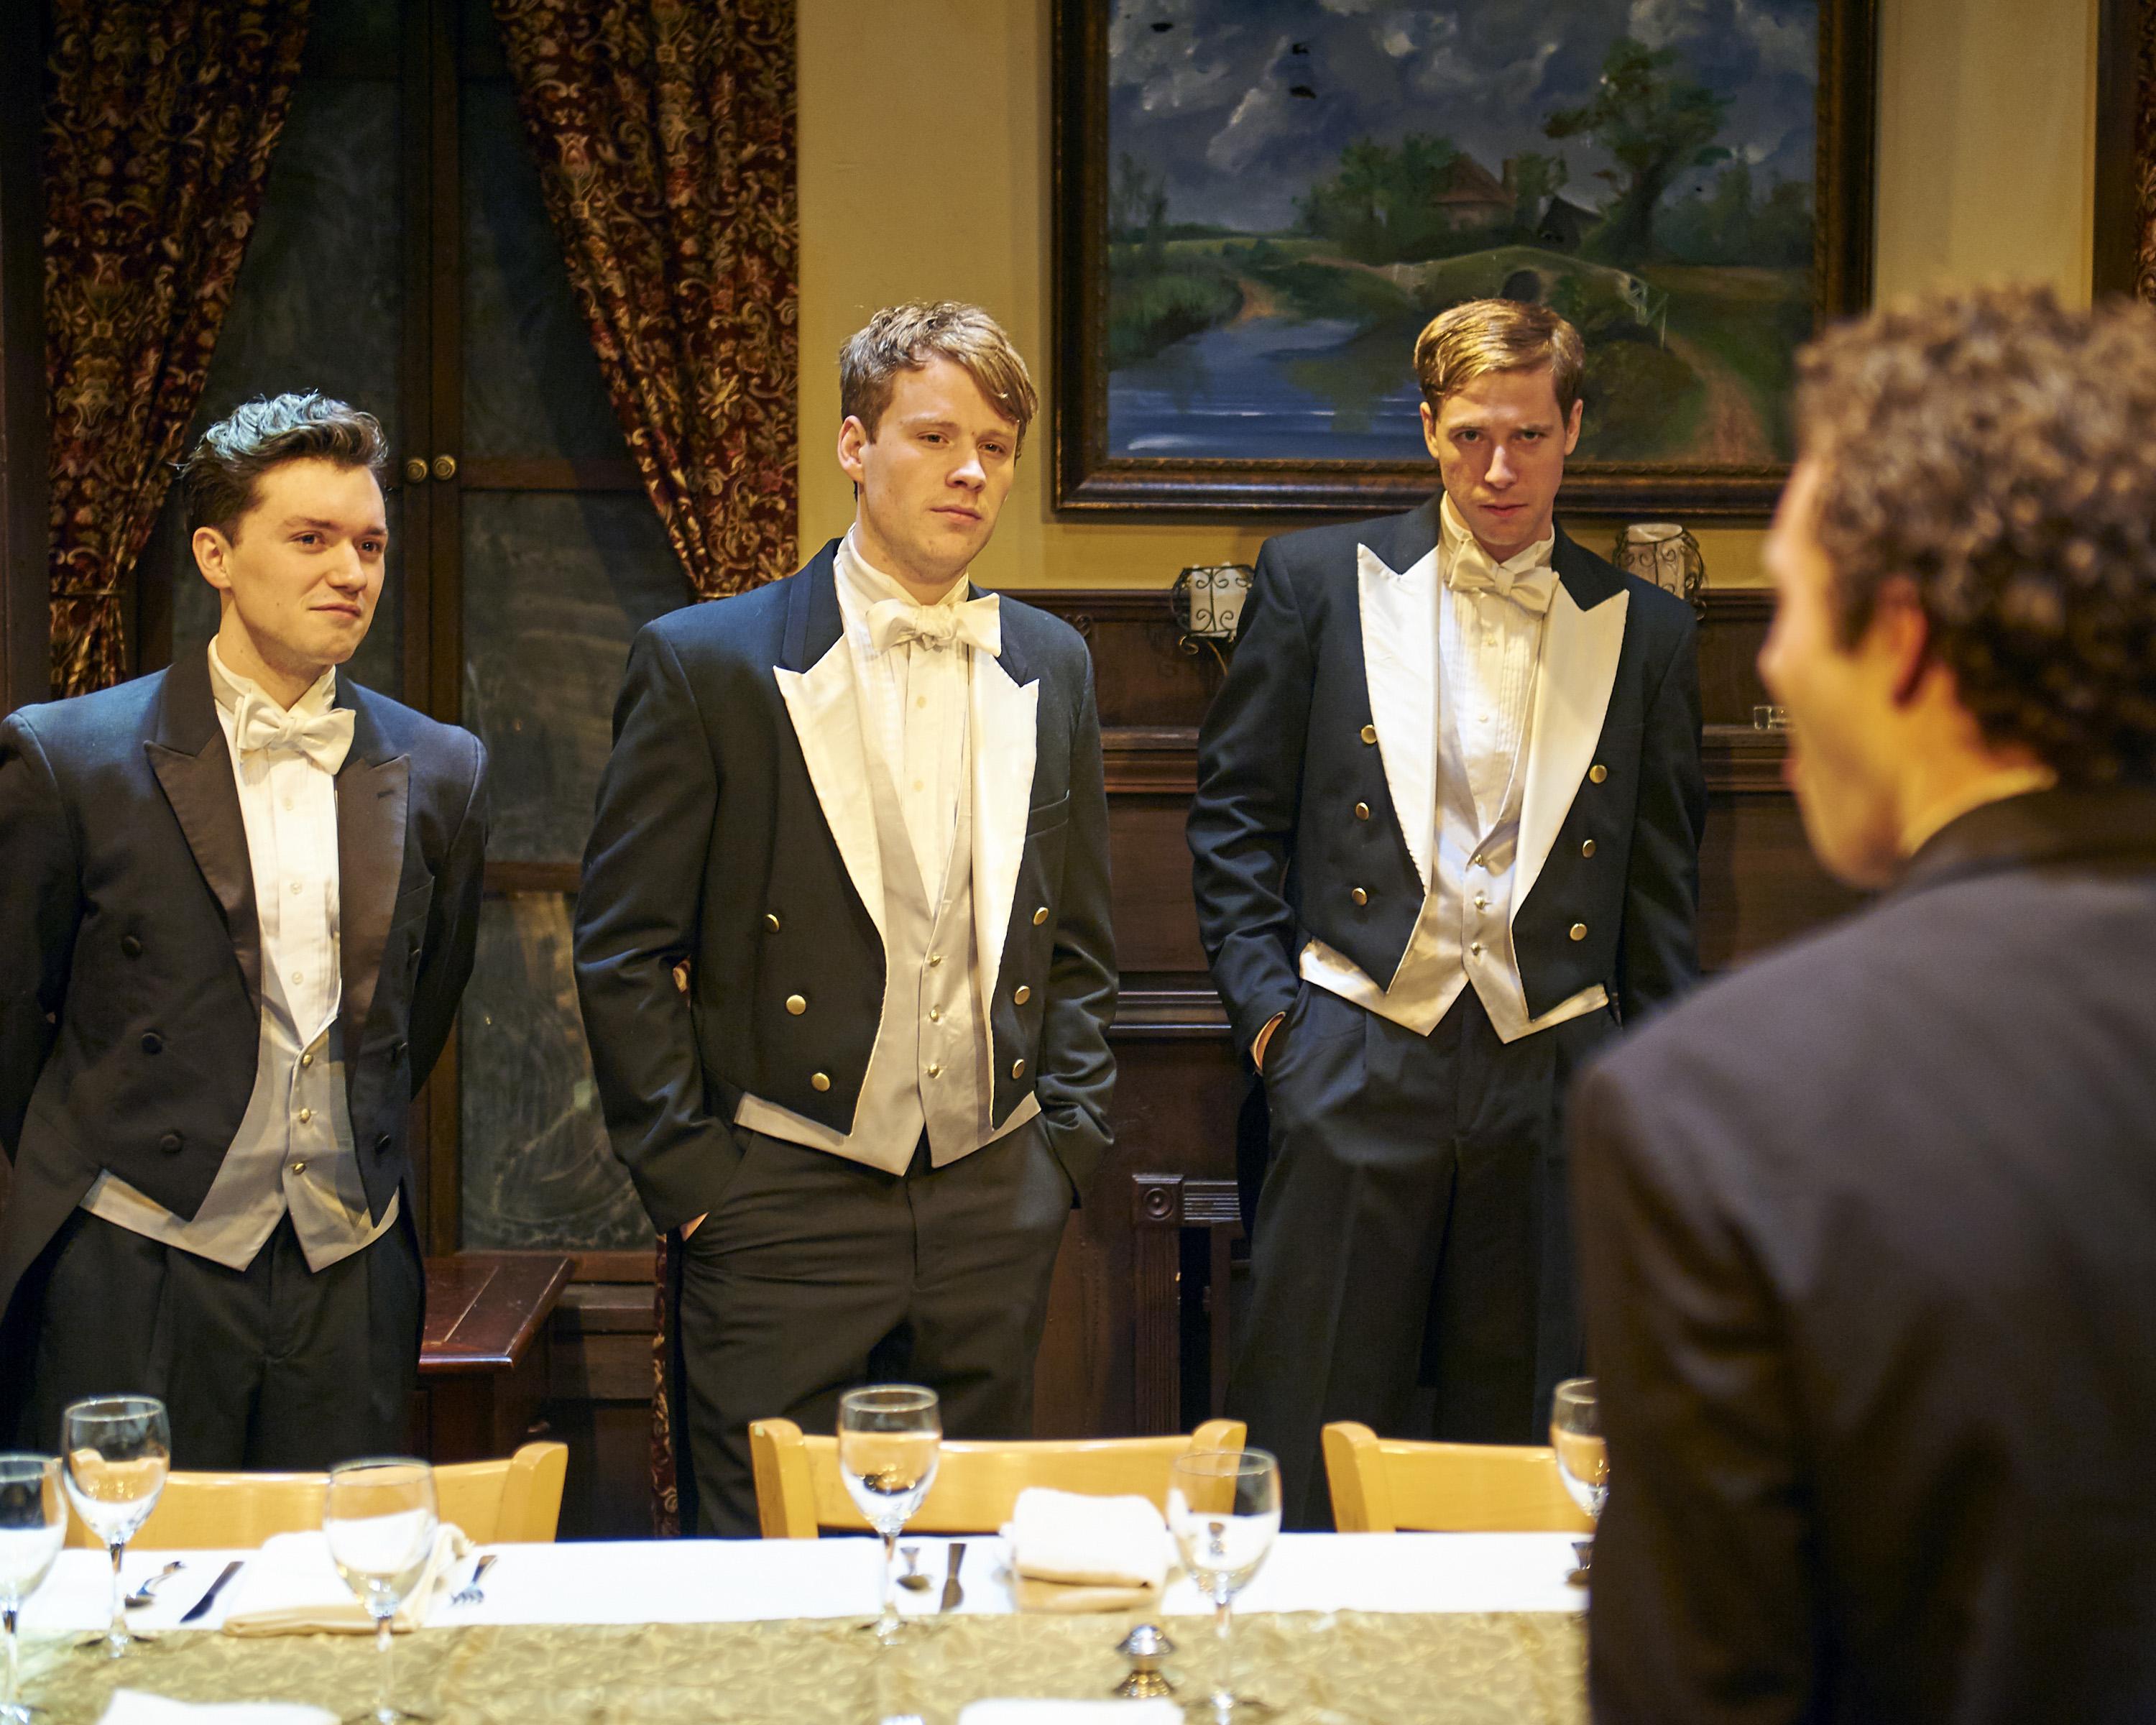 From left: Matthew Garry, Dash Barber, Michael Holding and Sean Wiberg in "Posh" at Steep Theatre. (Lee Miller)